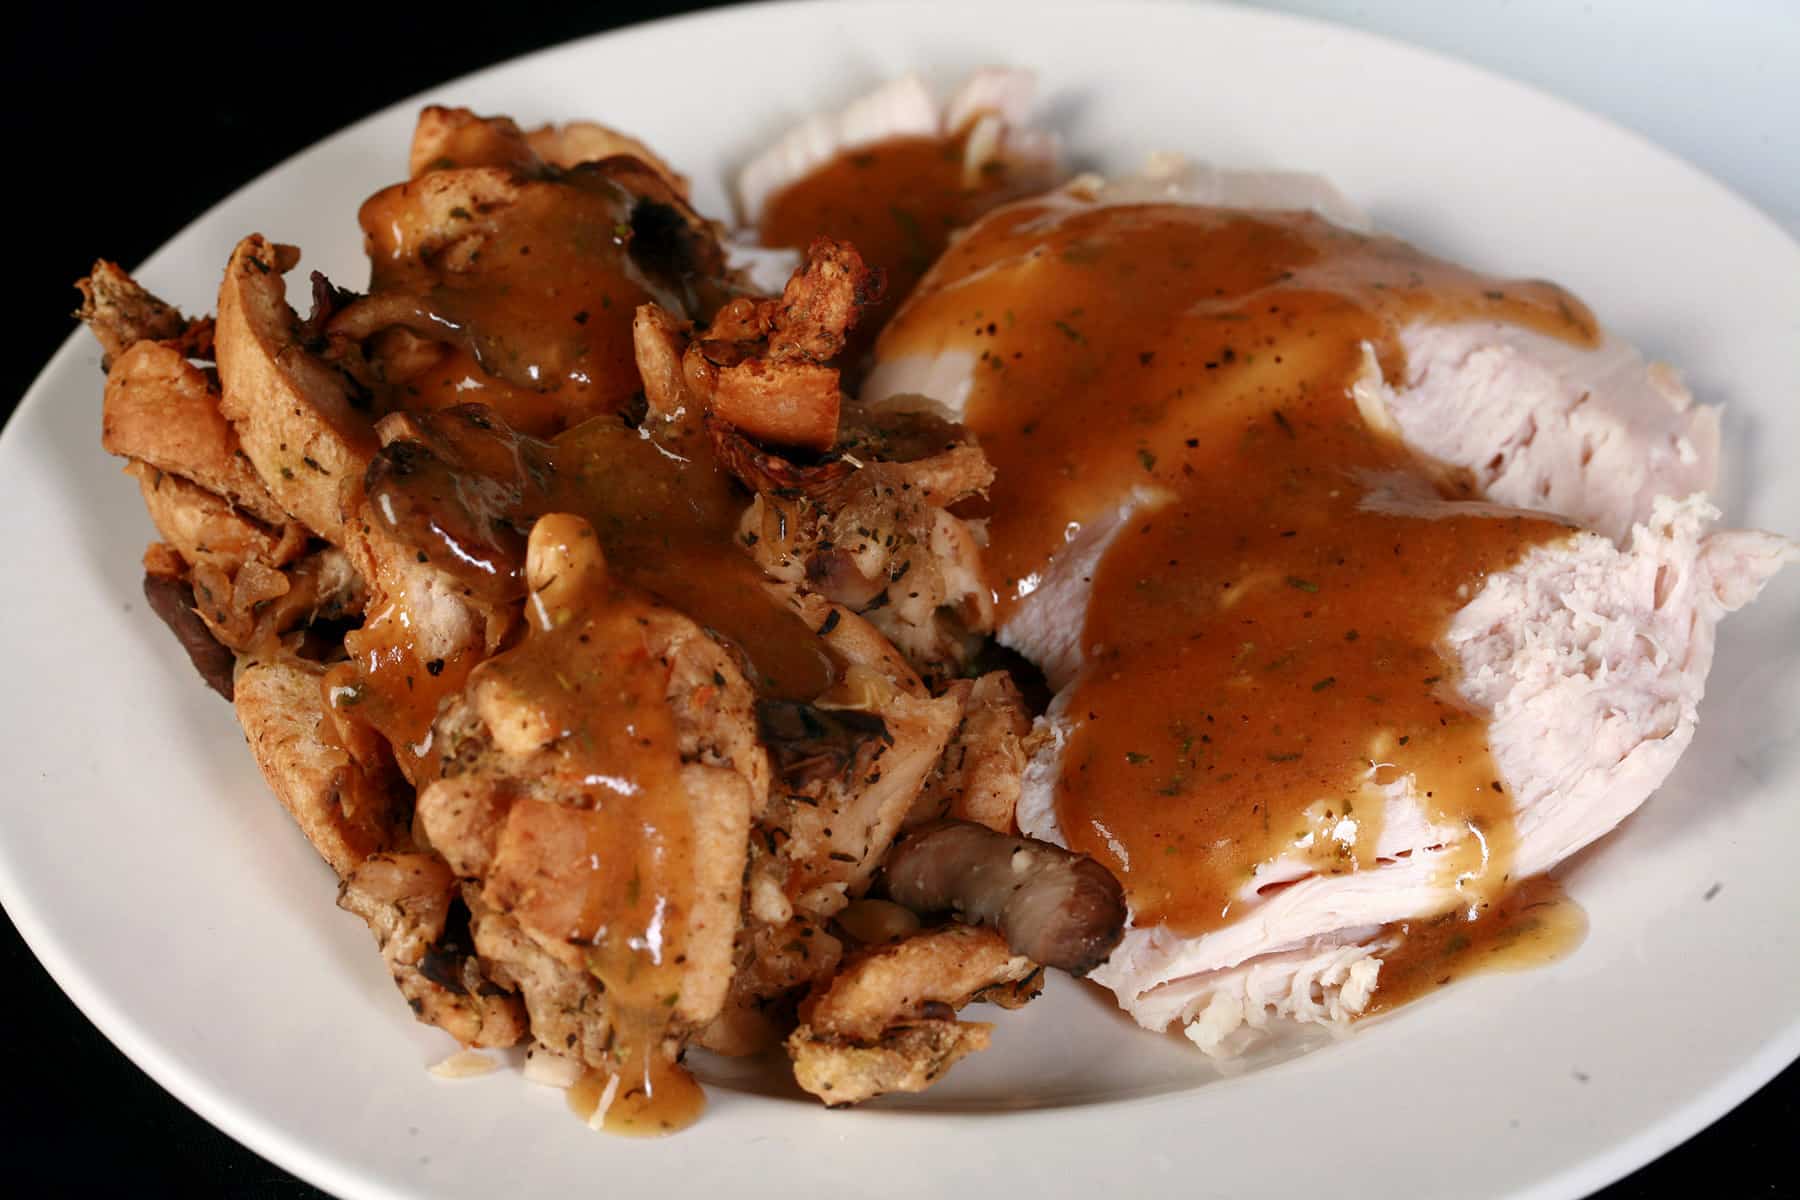 A plate of keto stuffing and turkey, covered in keto turkey gravy.